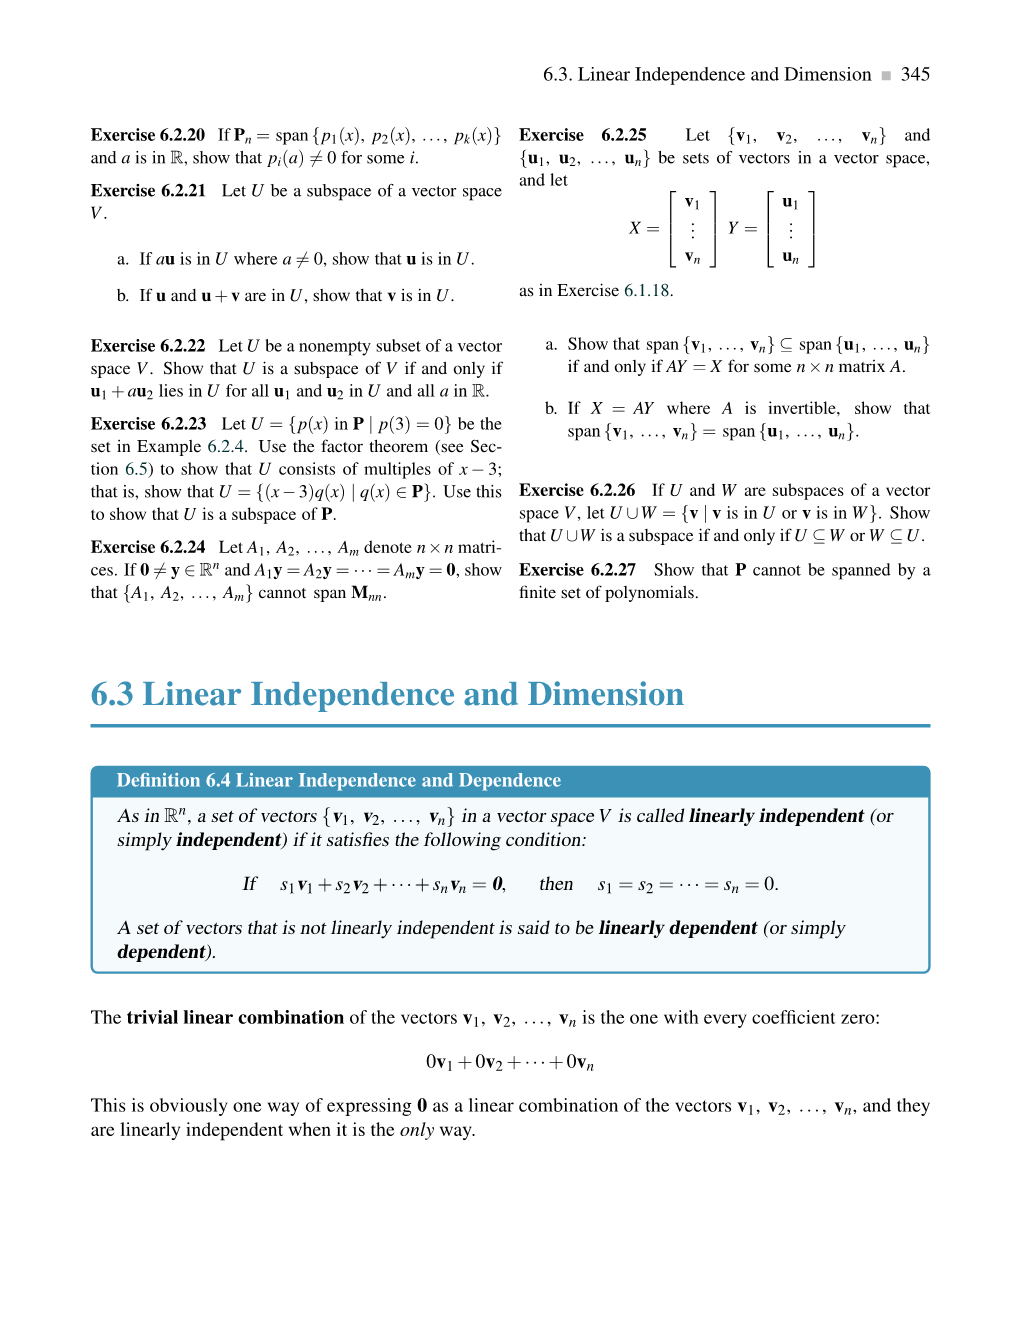 6.3 Linear Independence and Dimension